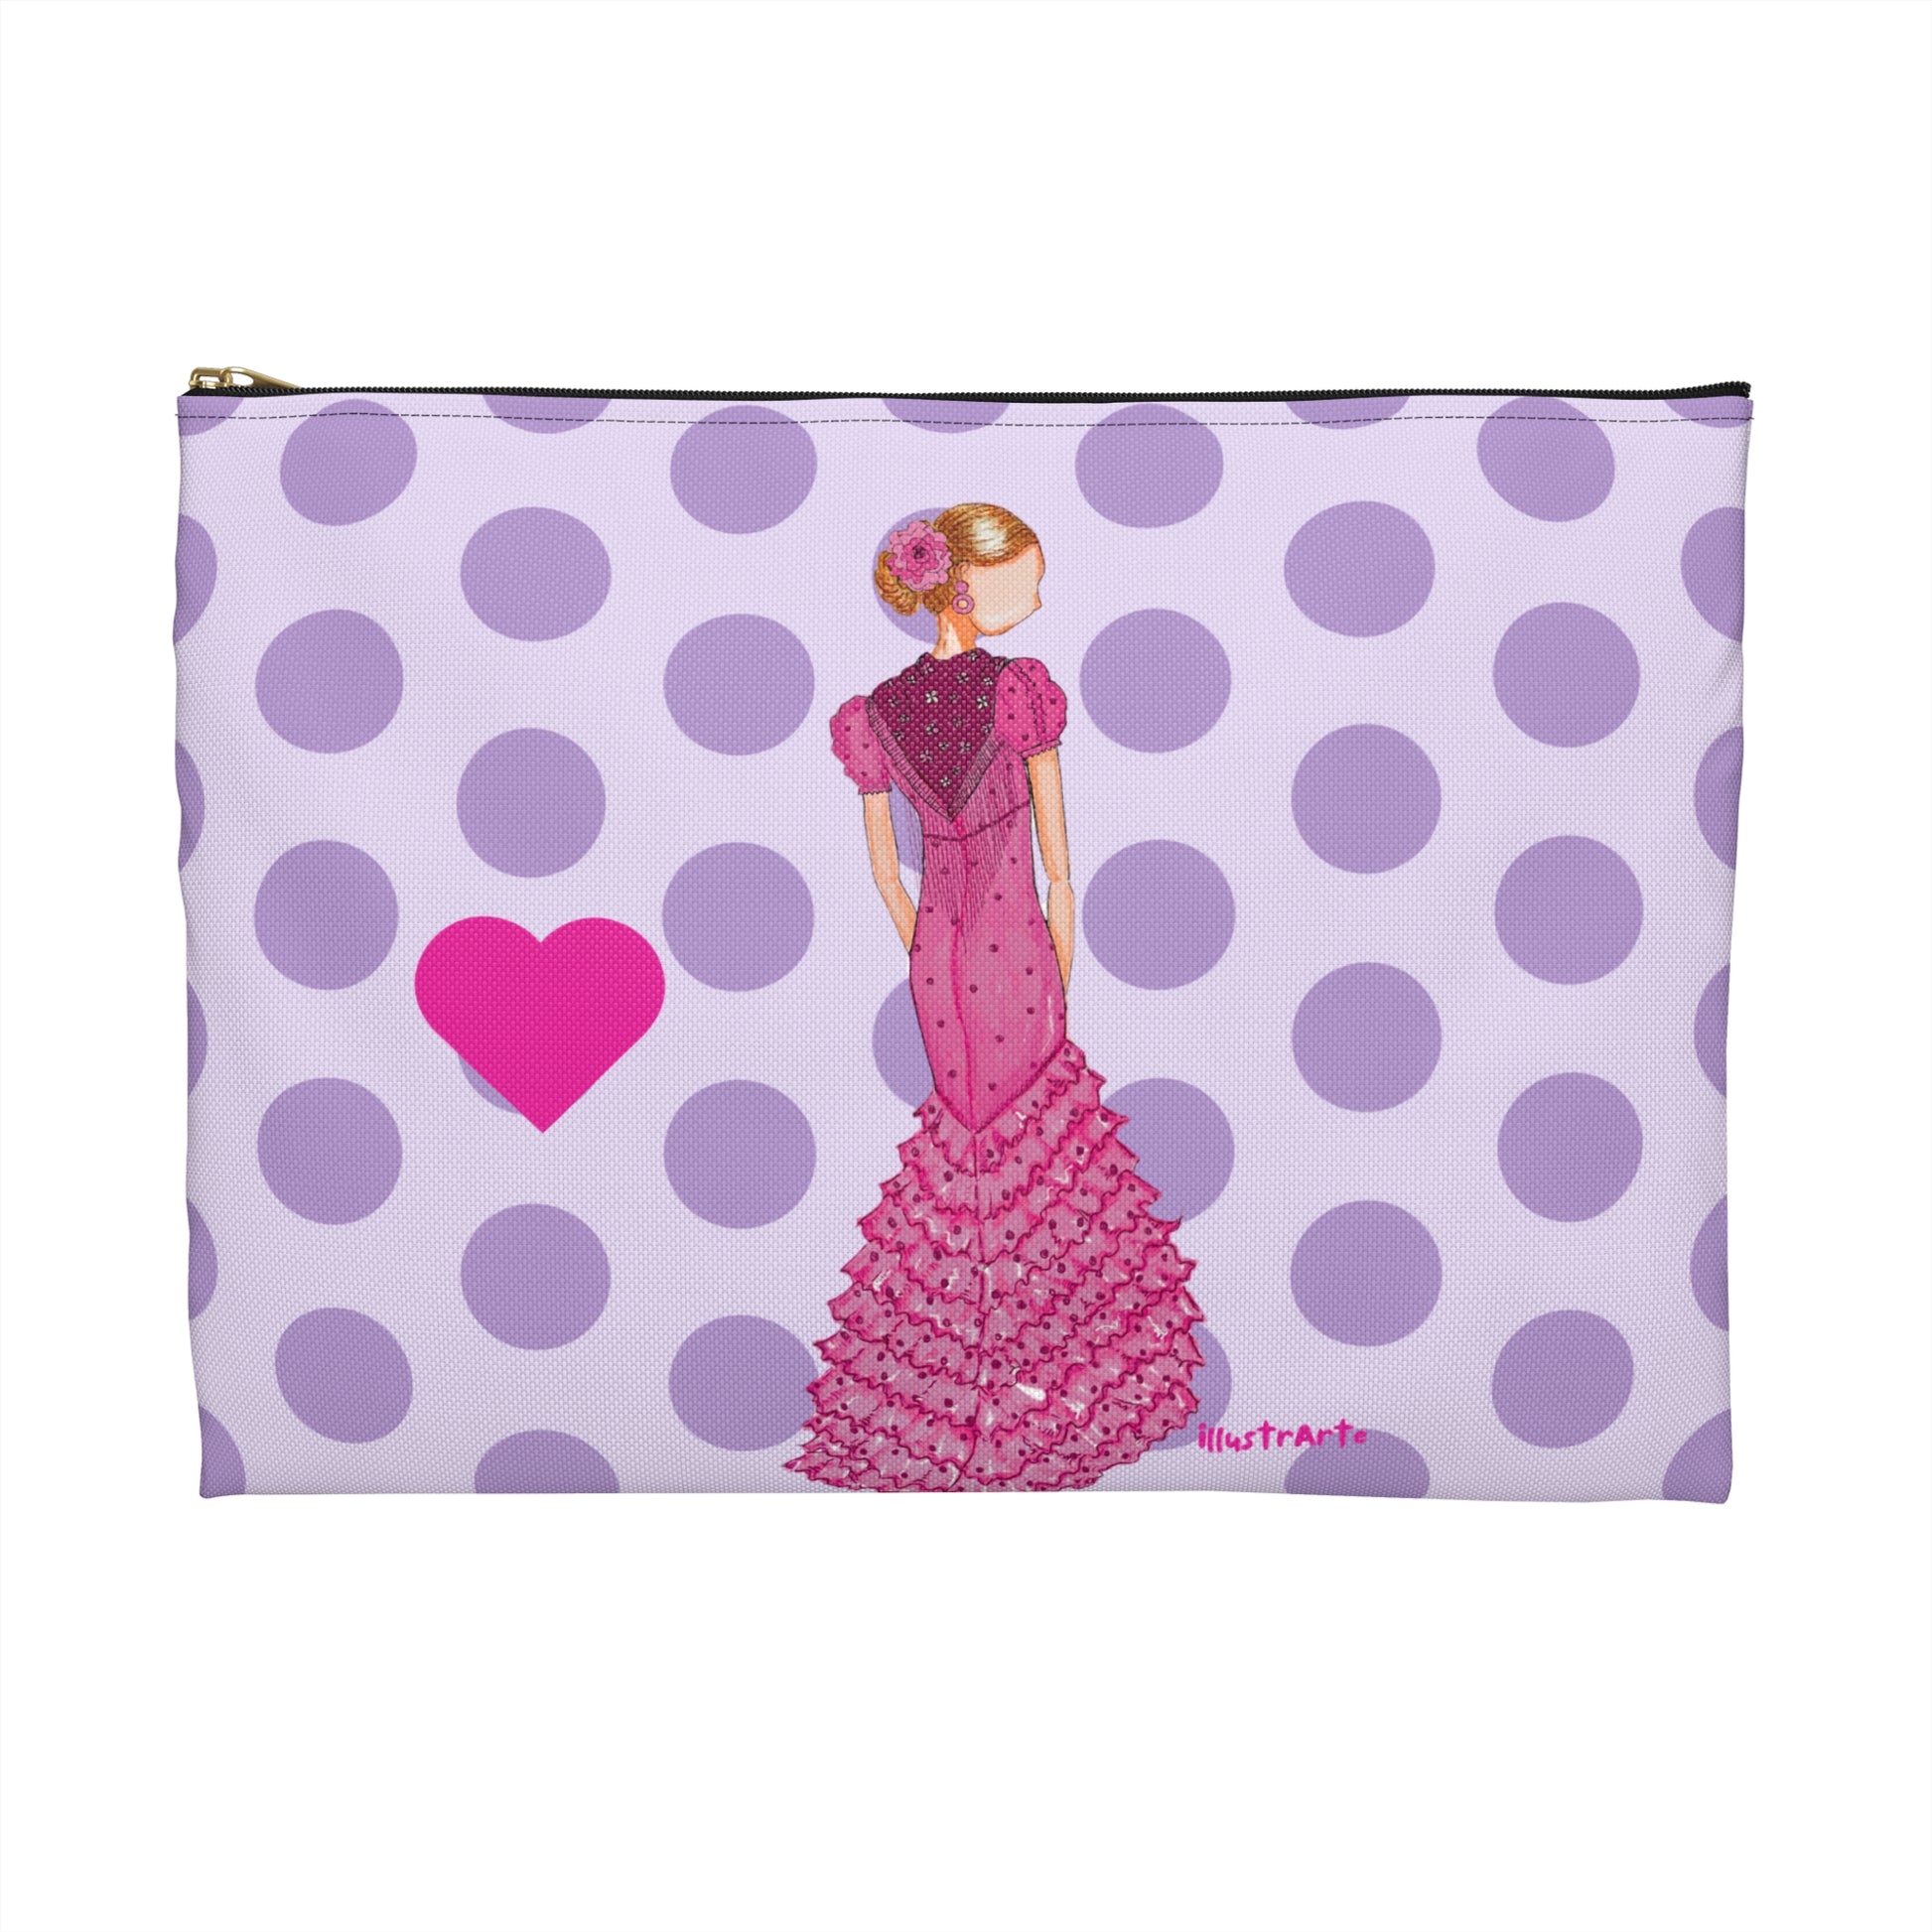 a purple polka dot purse with a woman in a pink dress